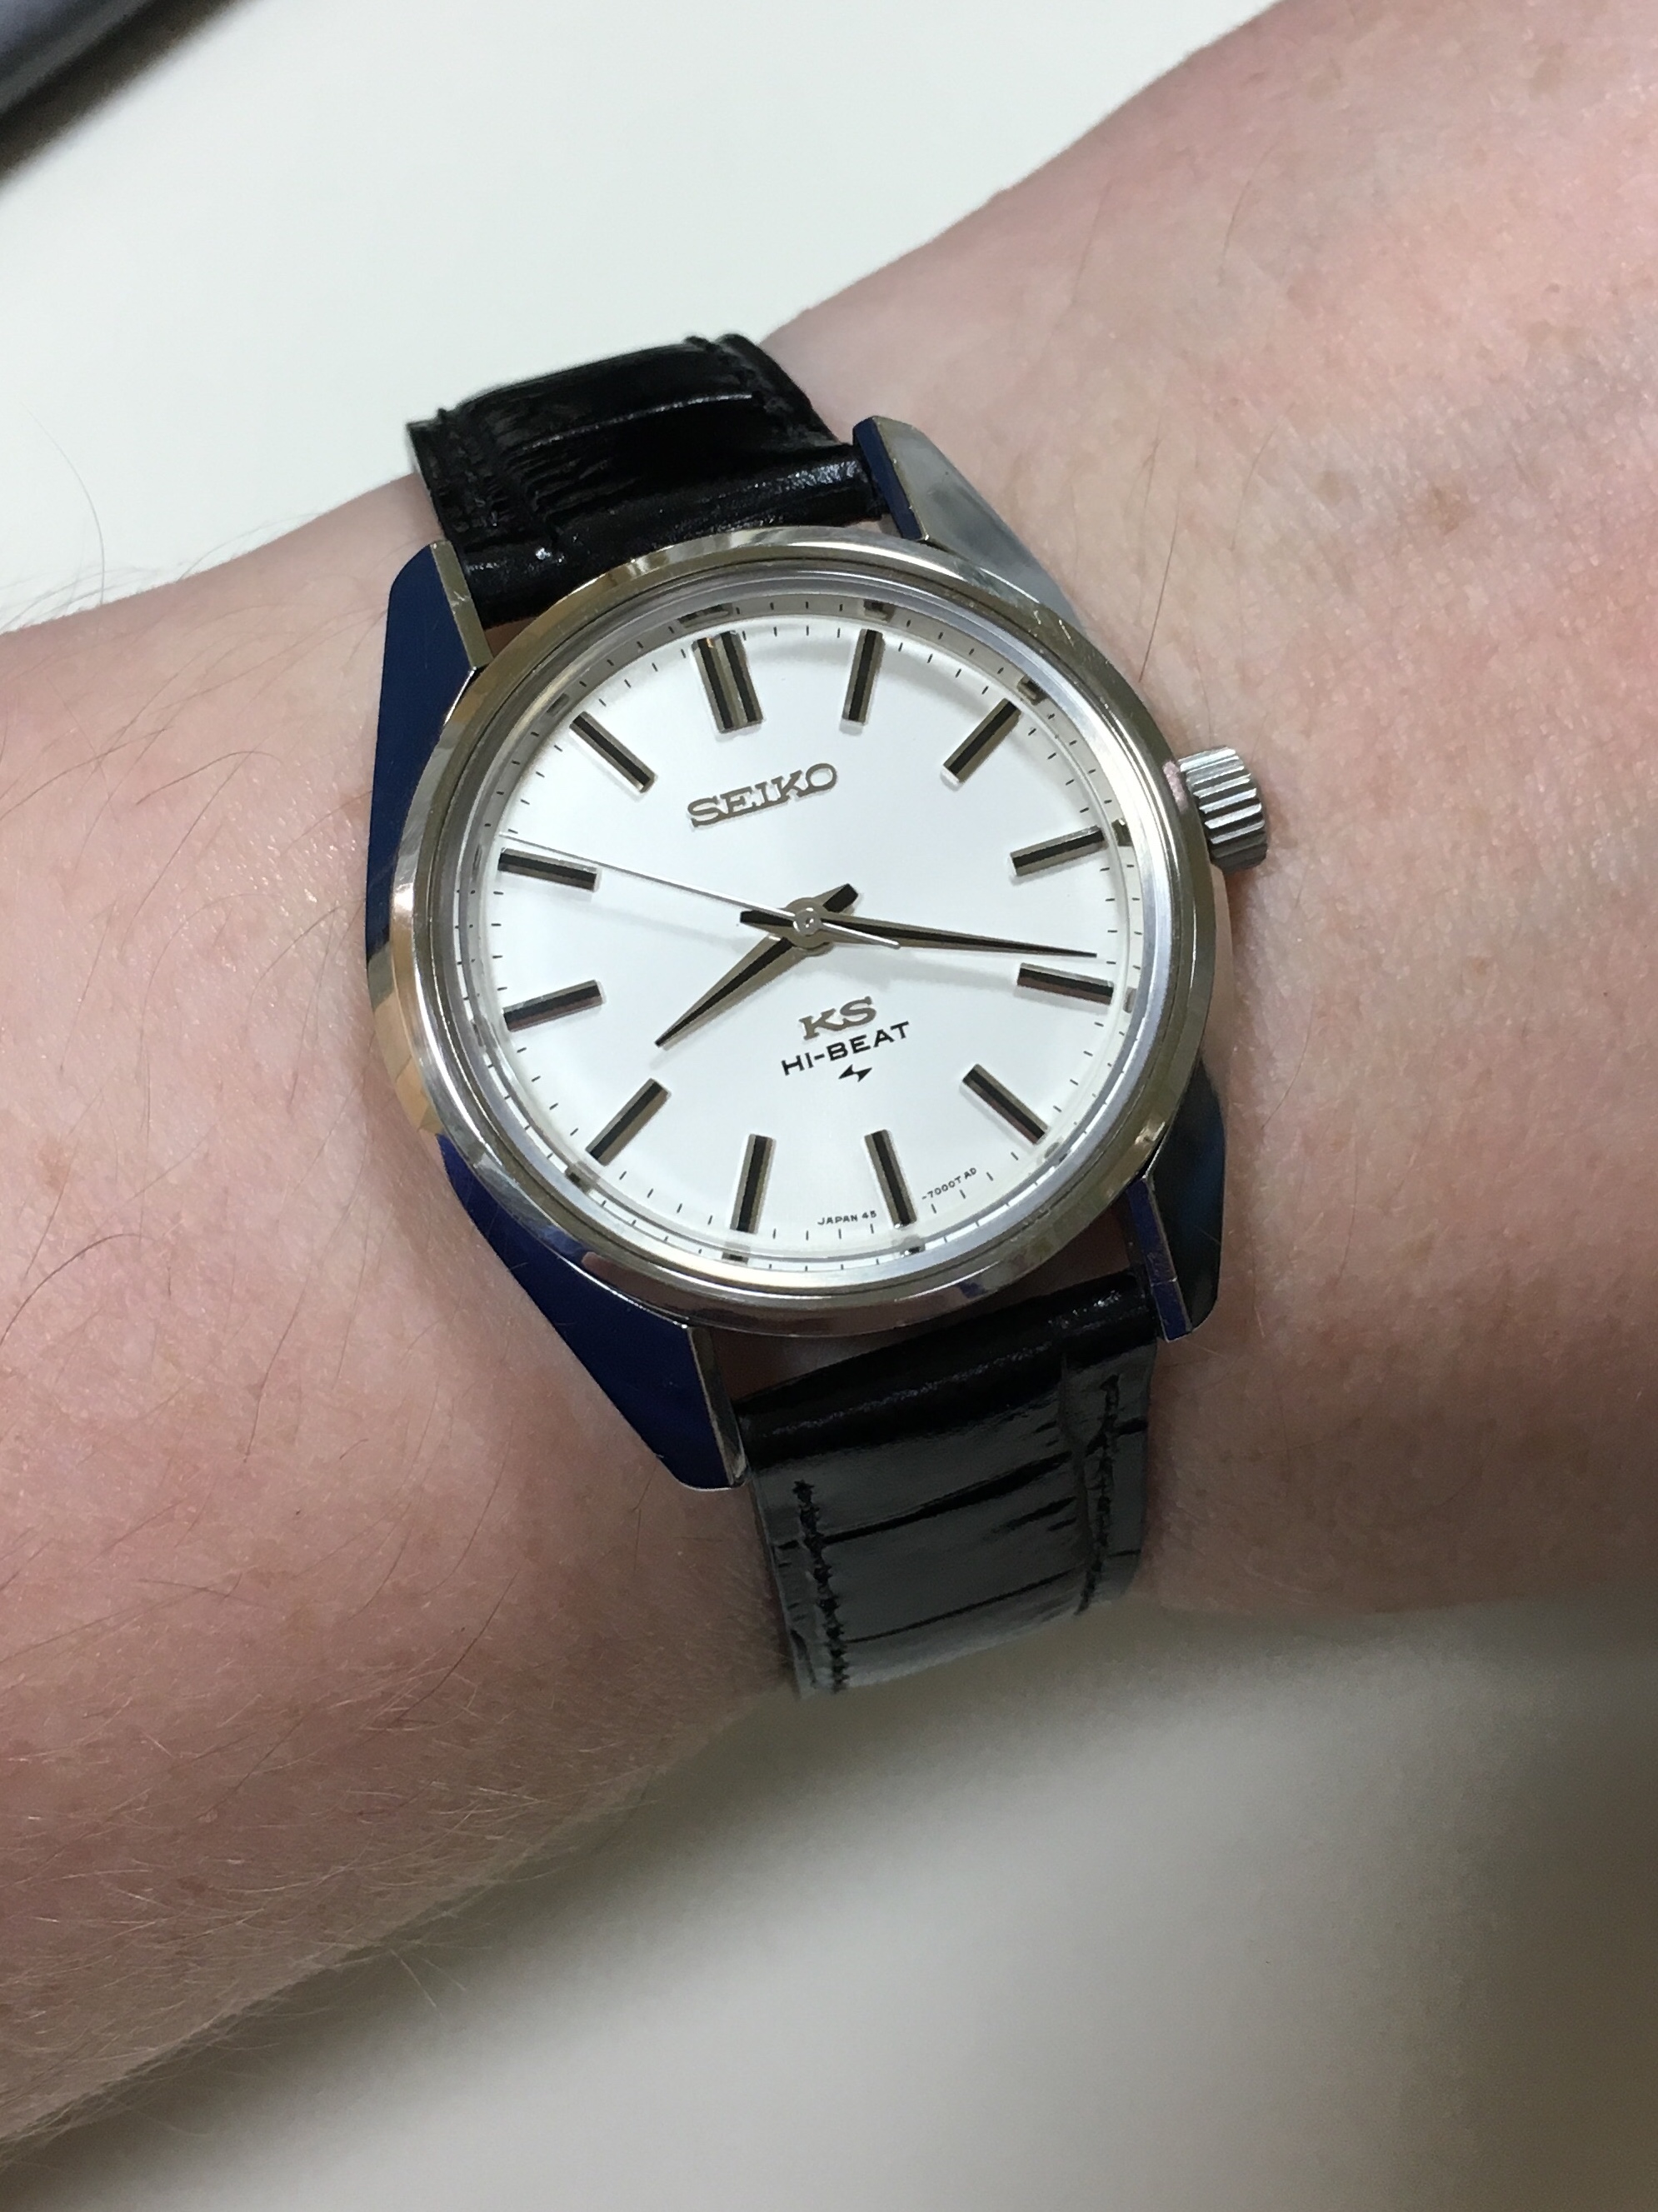 Grammar of Design and the restoration of a King Seiko 45-7001.